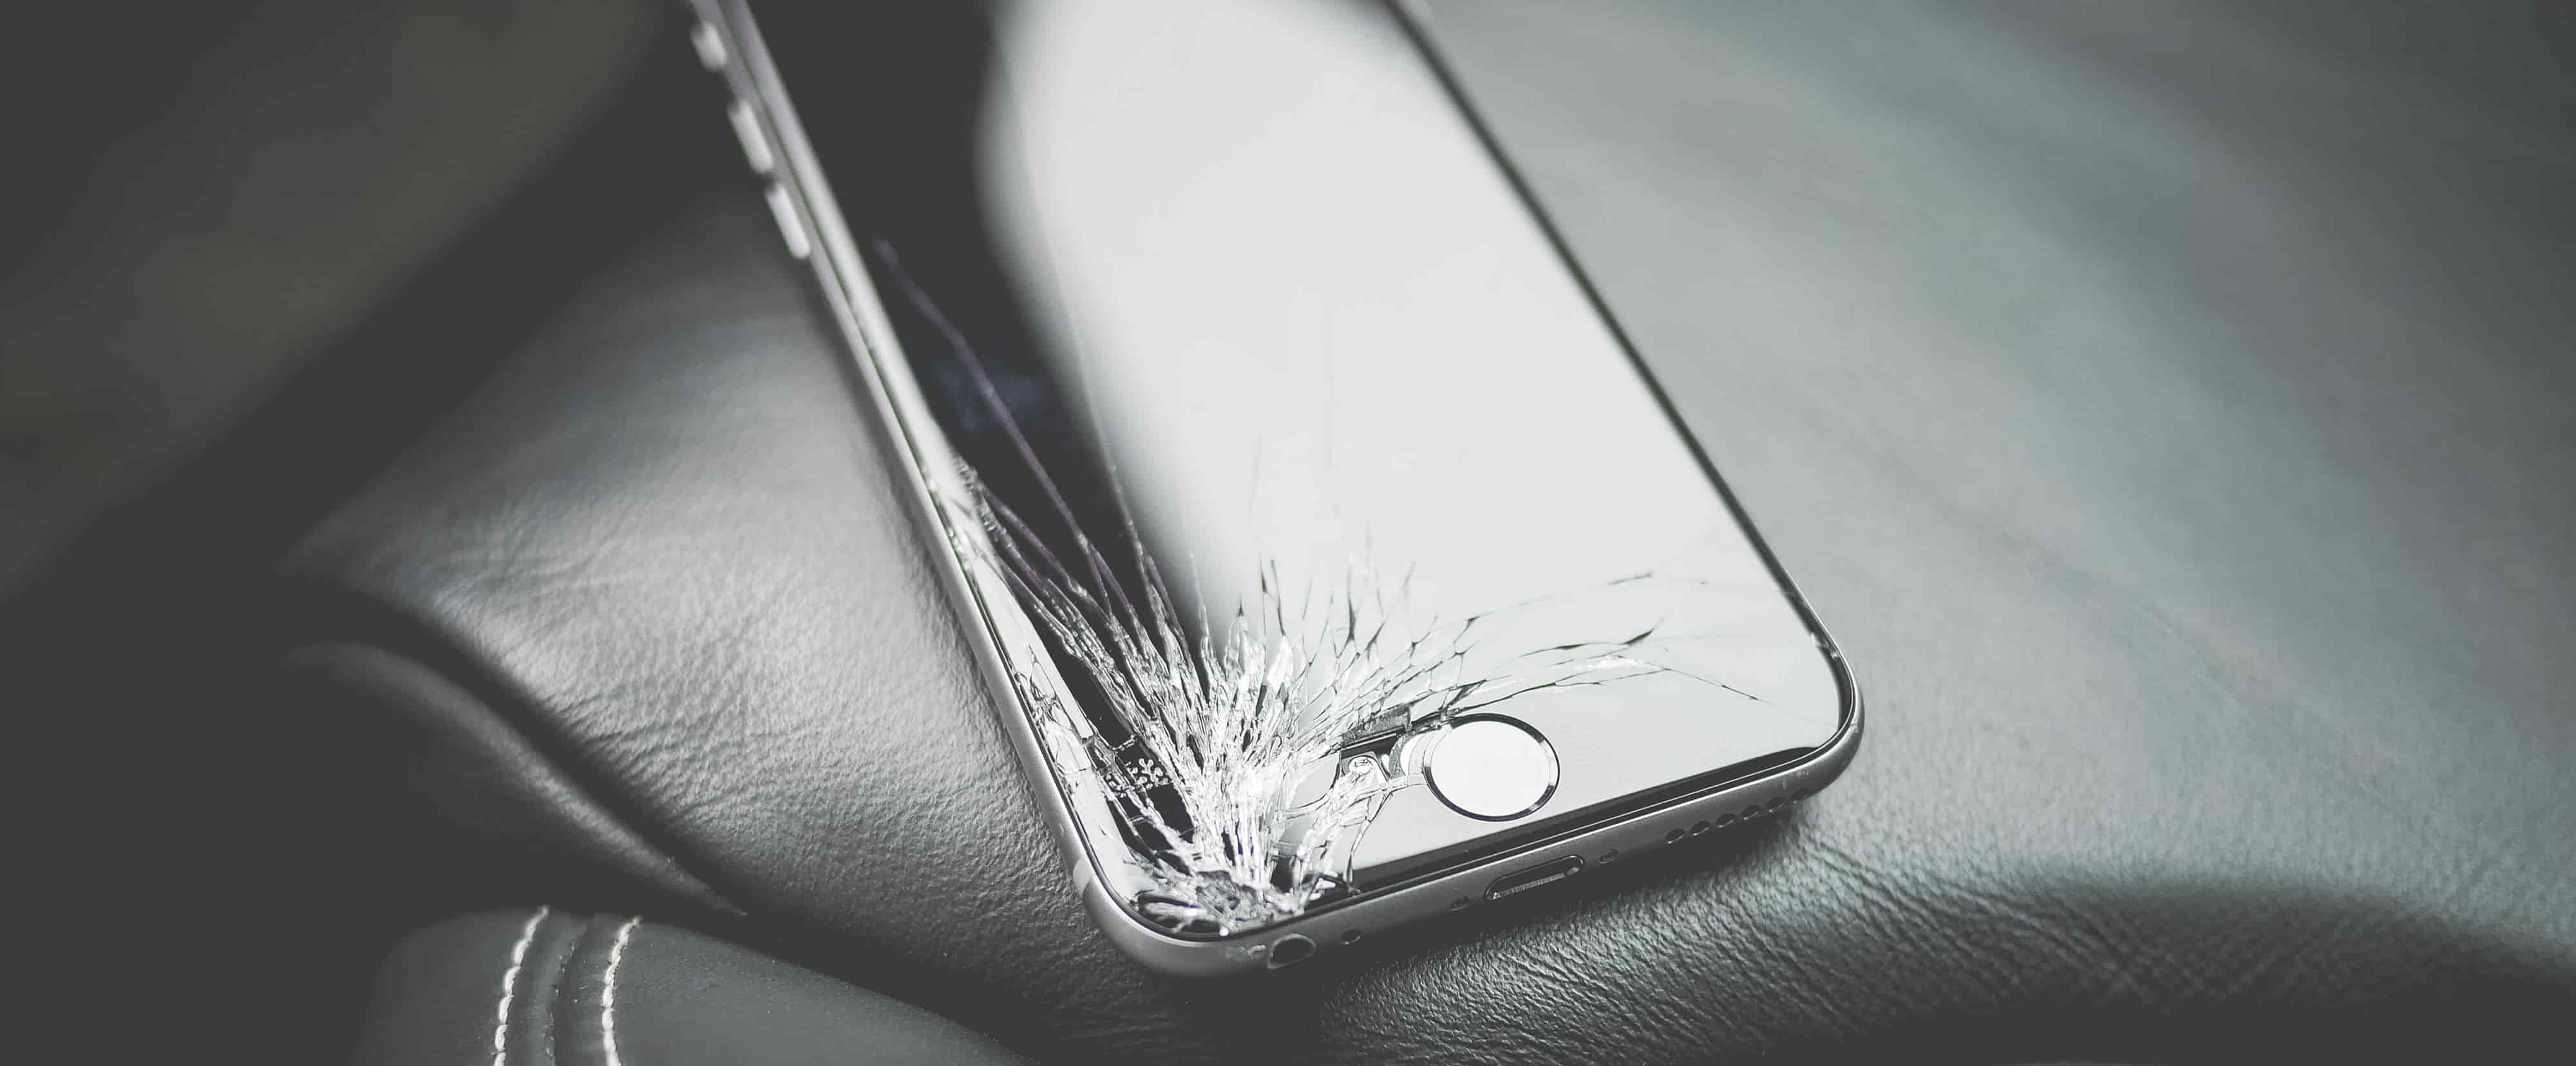 A black iPhone with a cracked screen sitting on a black leather car seat